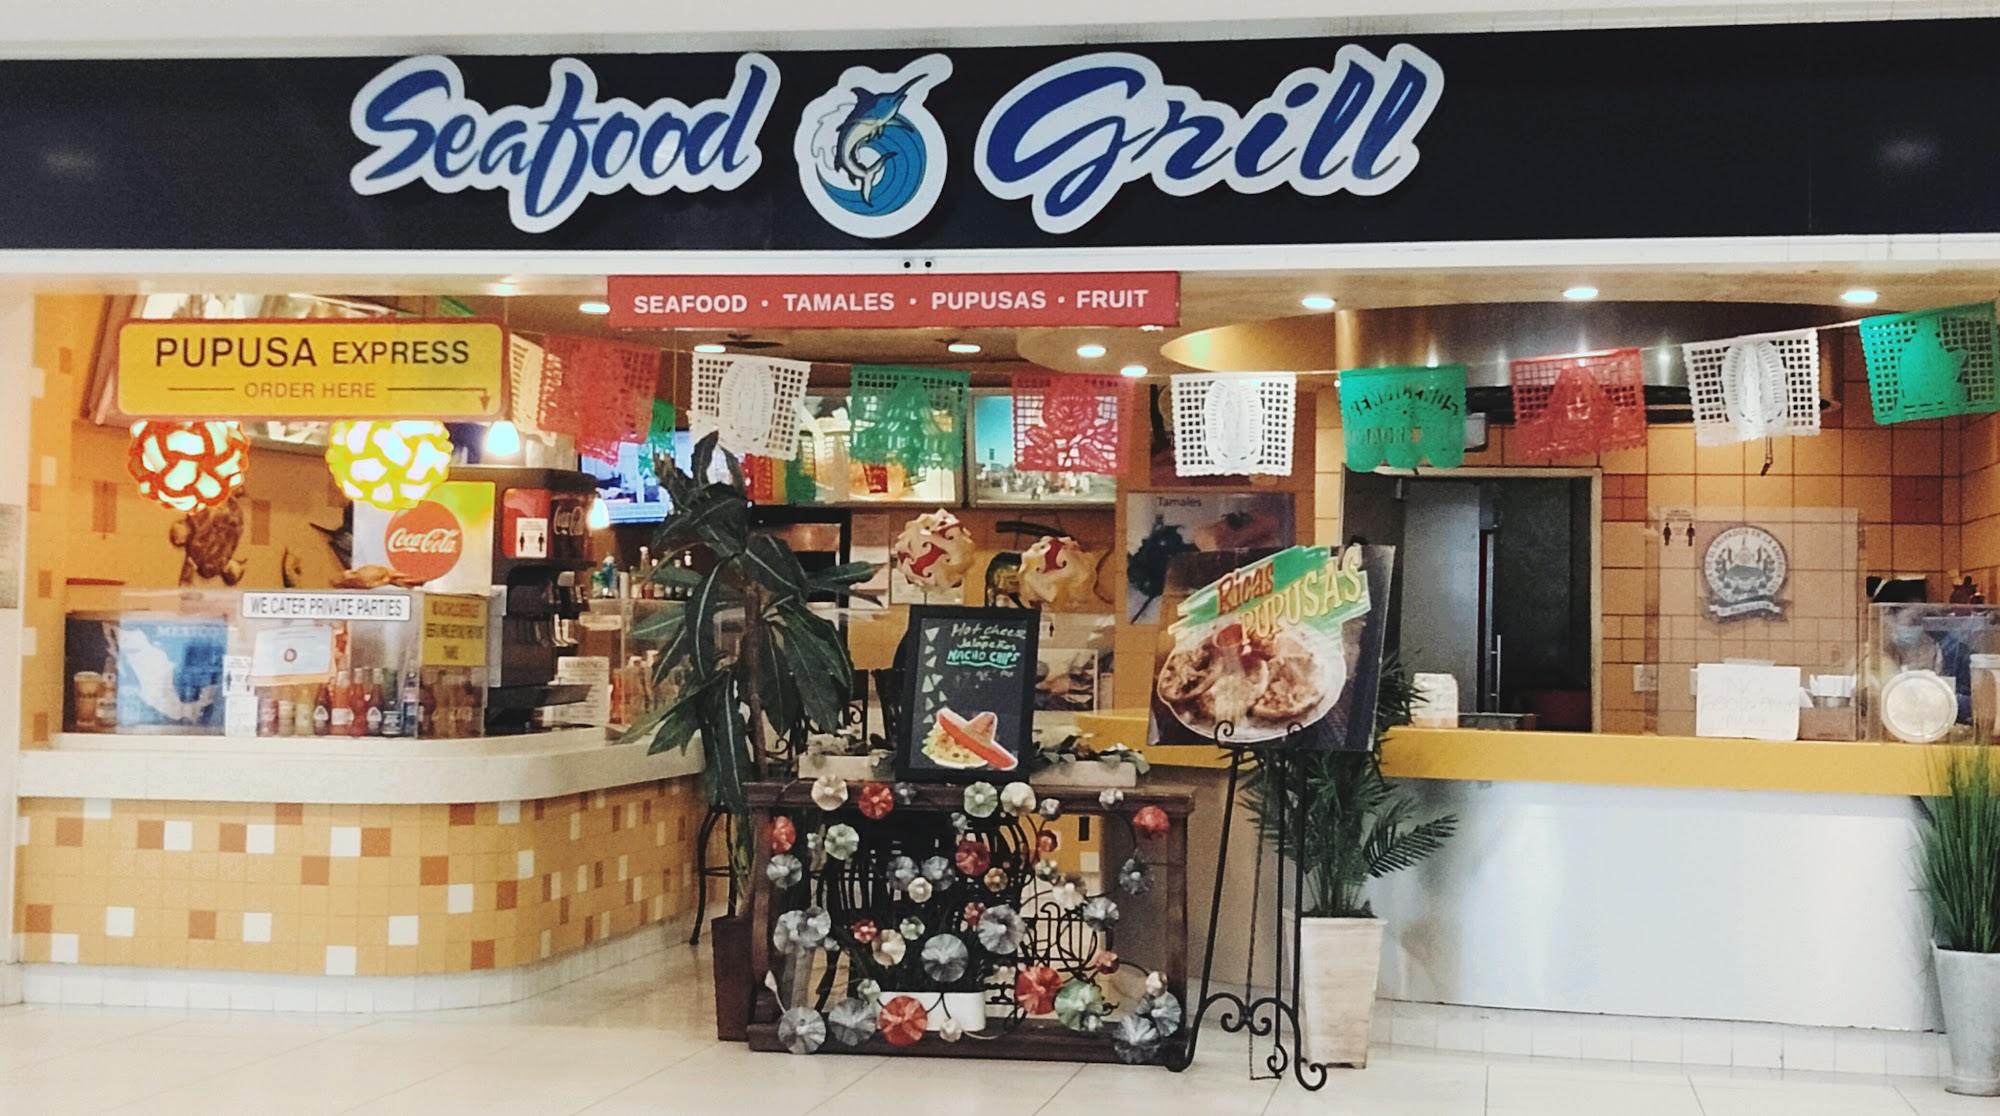 The Seafood Grill